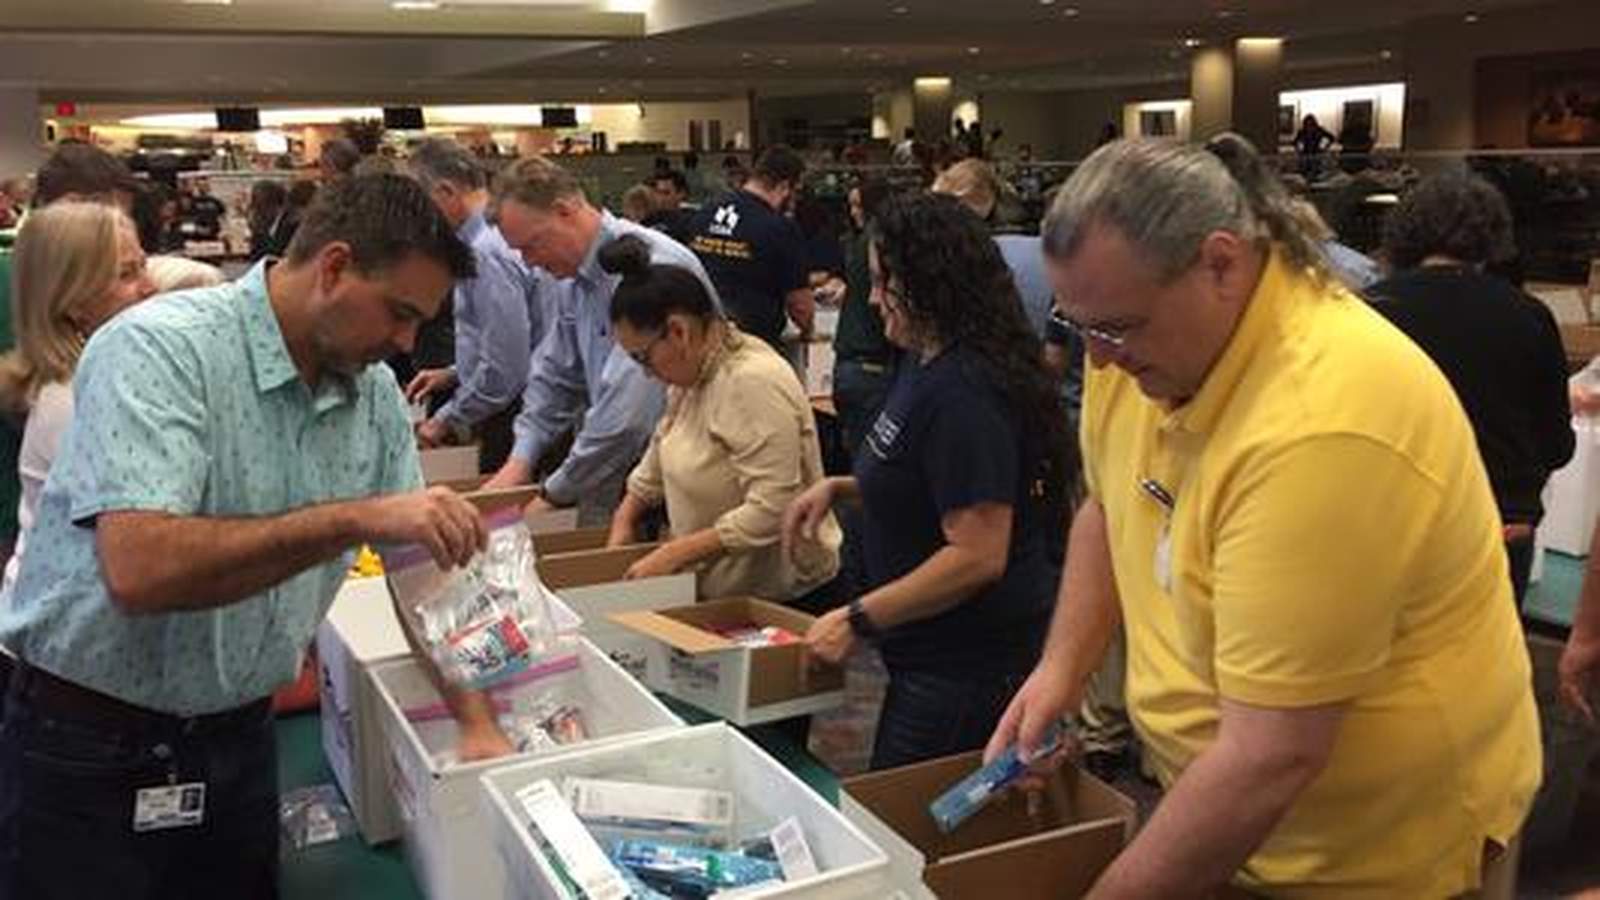 USAA employees help assemble care packages for deployed servicemembers